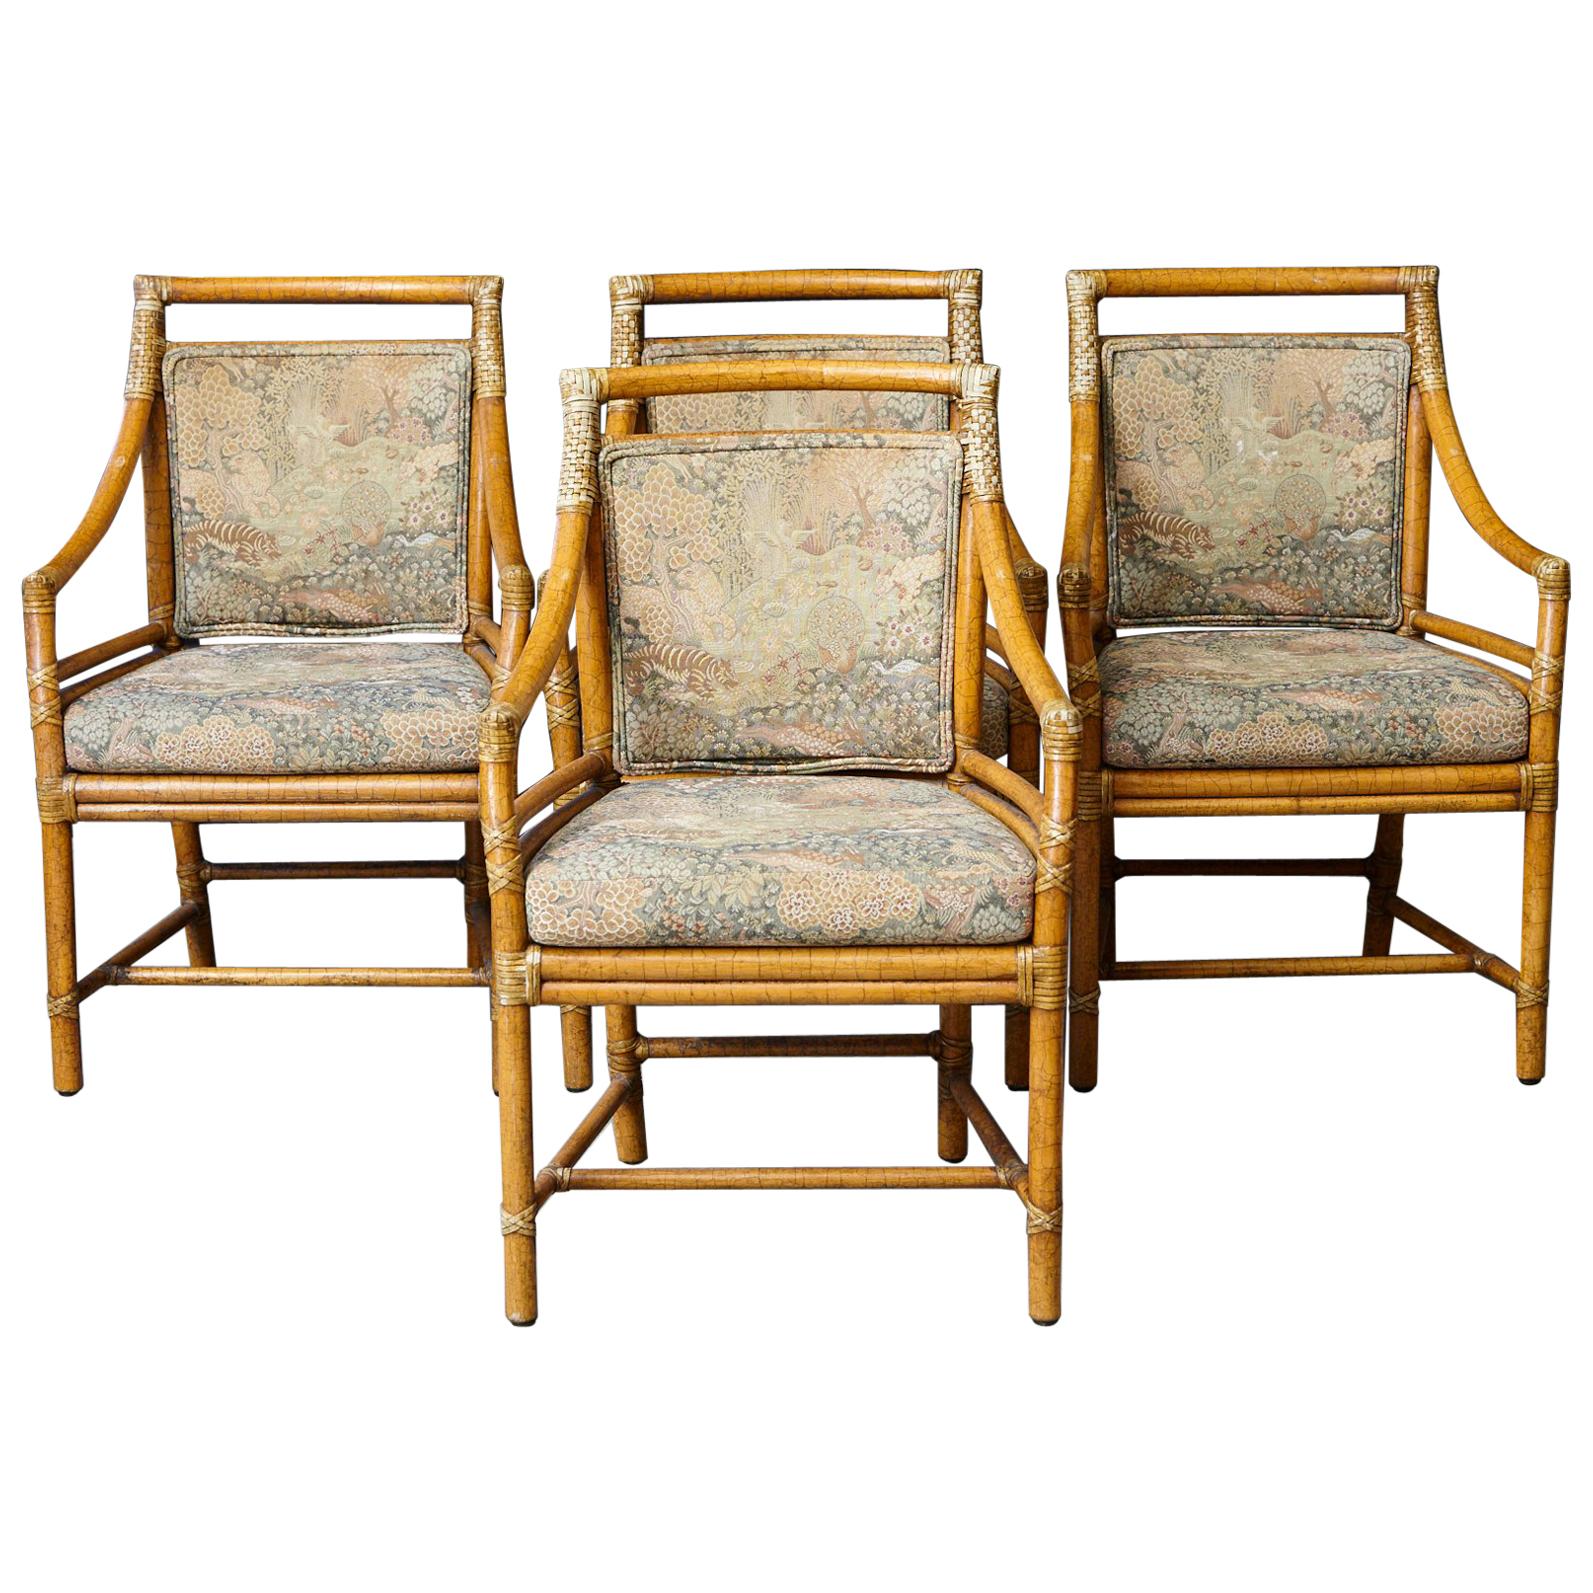 Set of 4 McGuire Rattan Target (M-59U) Armchairs with Upholstered Seat